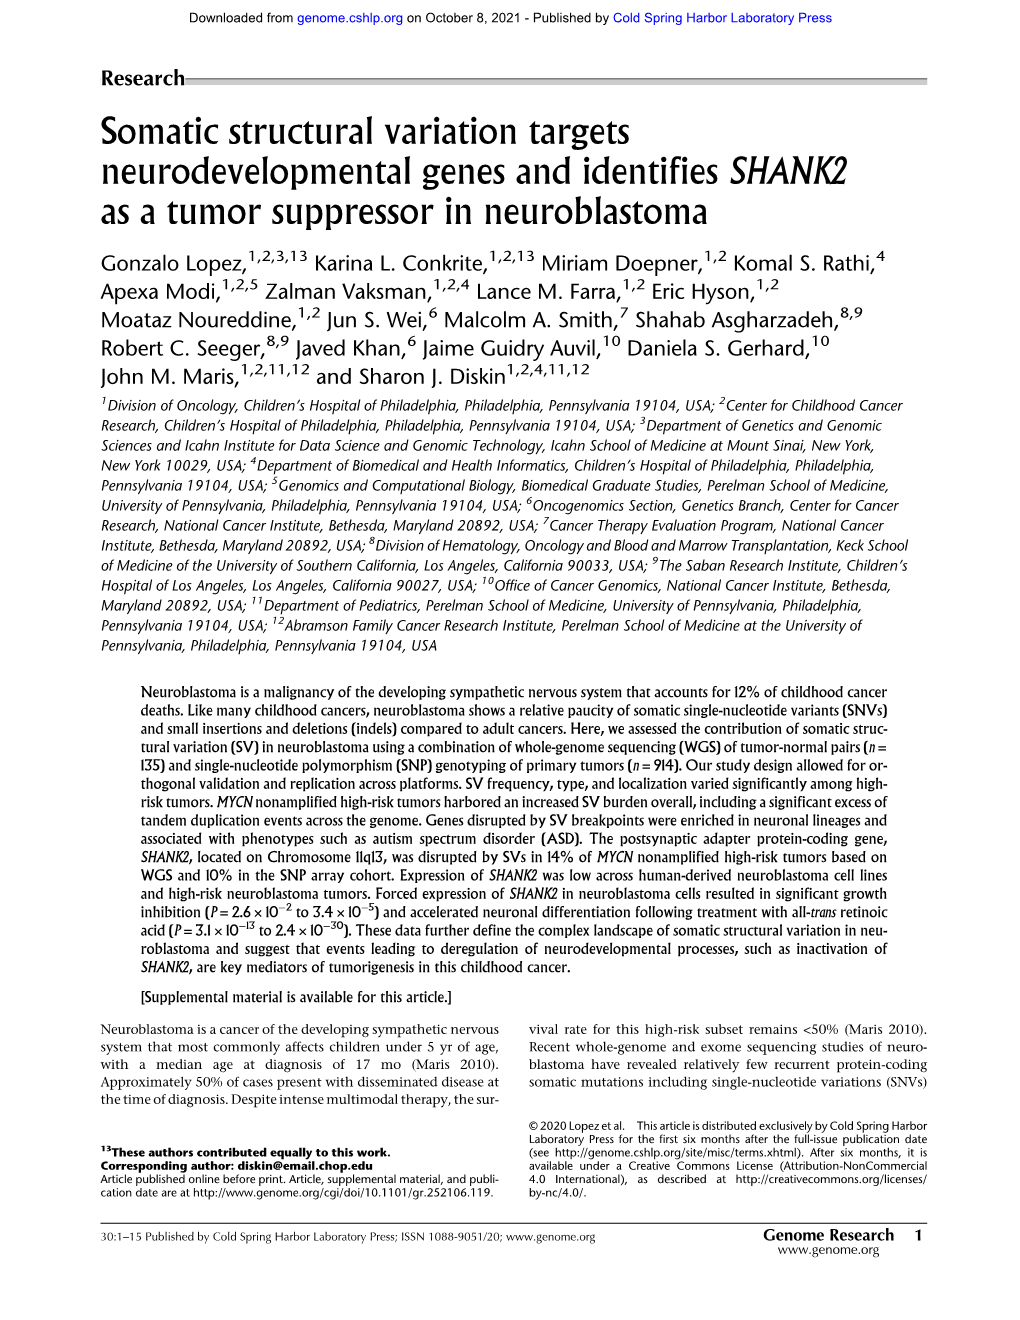 Somatic Structural Variation Targets Neurodevelopmental Genes and Identifies SHANK2 As a Tumor Suppressor in Neuroblastoma